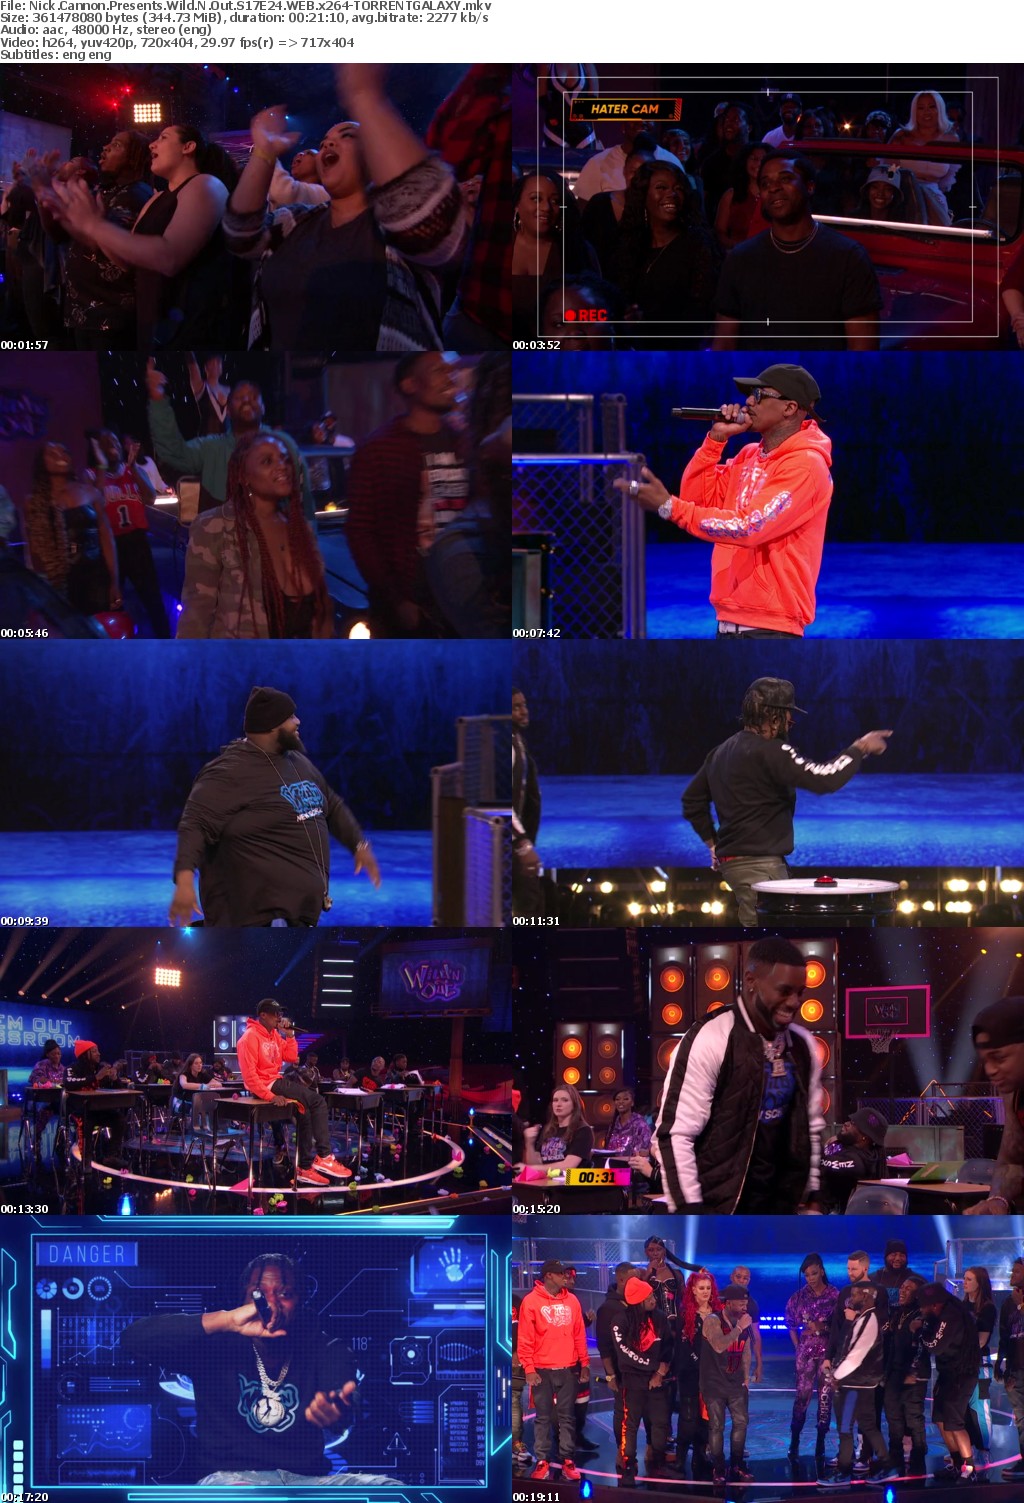 Nick Cannon Presents Wild N Out S17E24 WEB x264-GALAXY